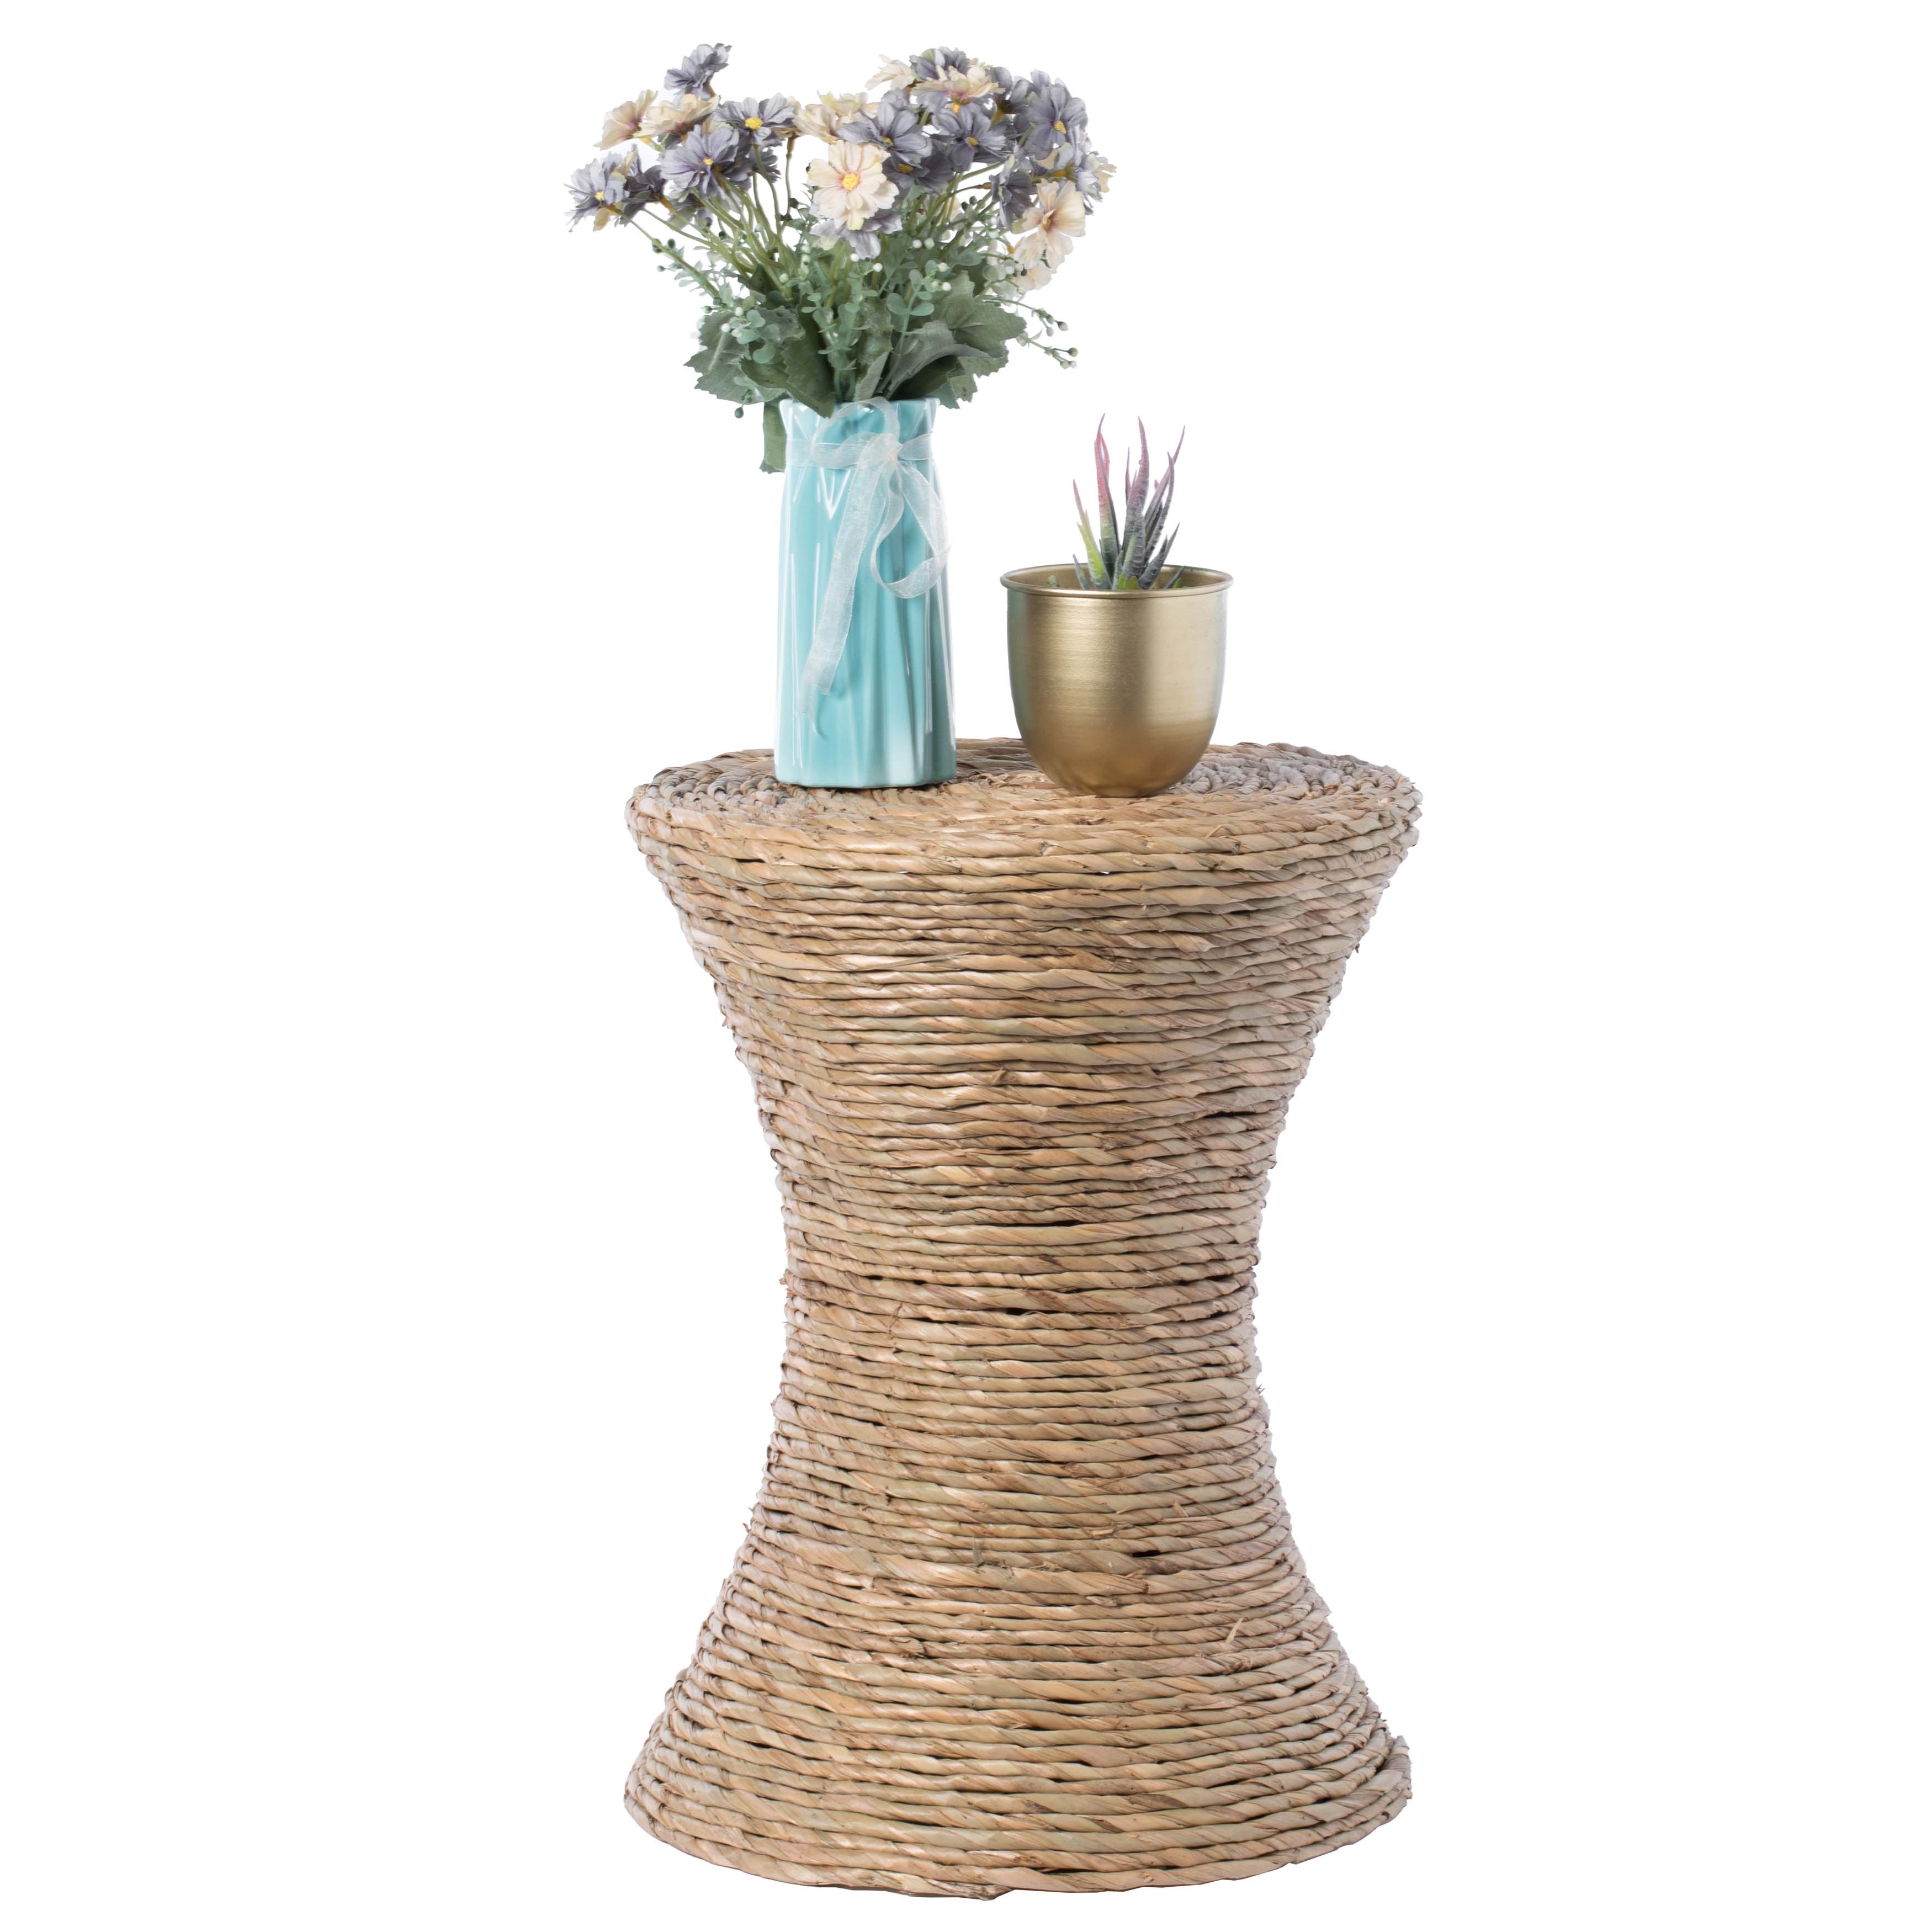 wickerwise Decorative Round Wicker Side Table Hourglass Shape Accent Coffee Table